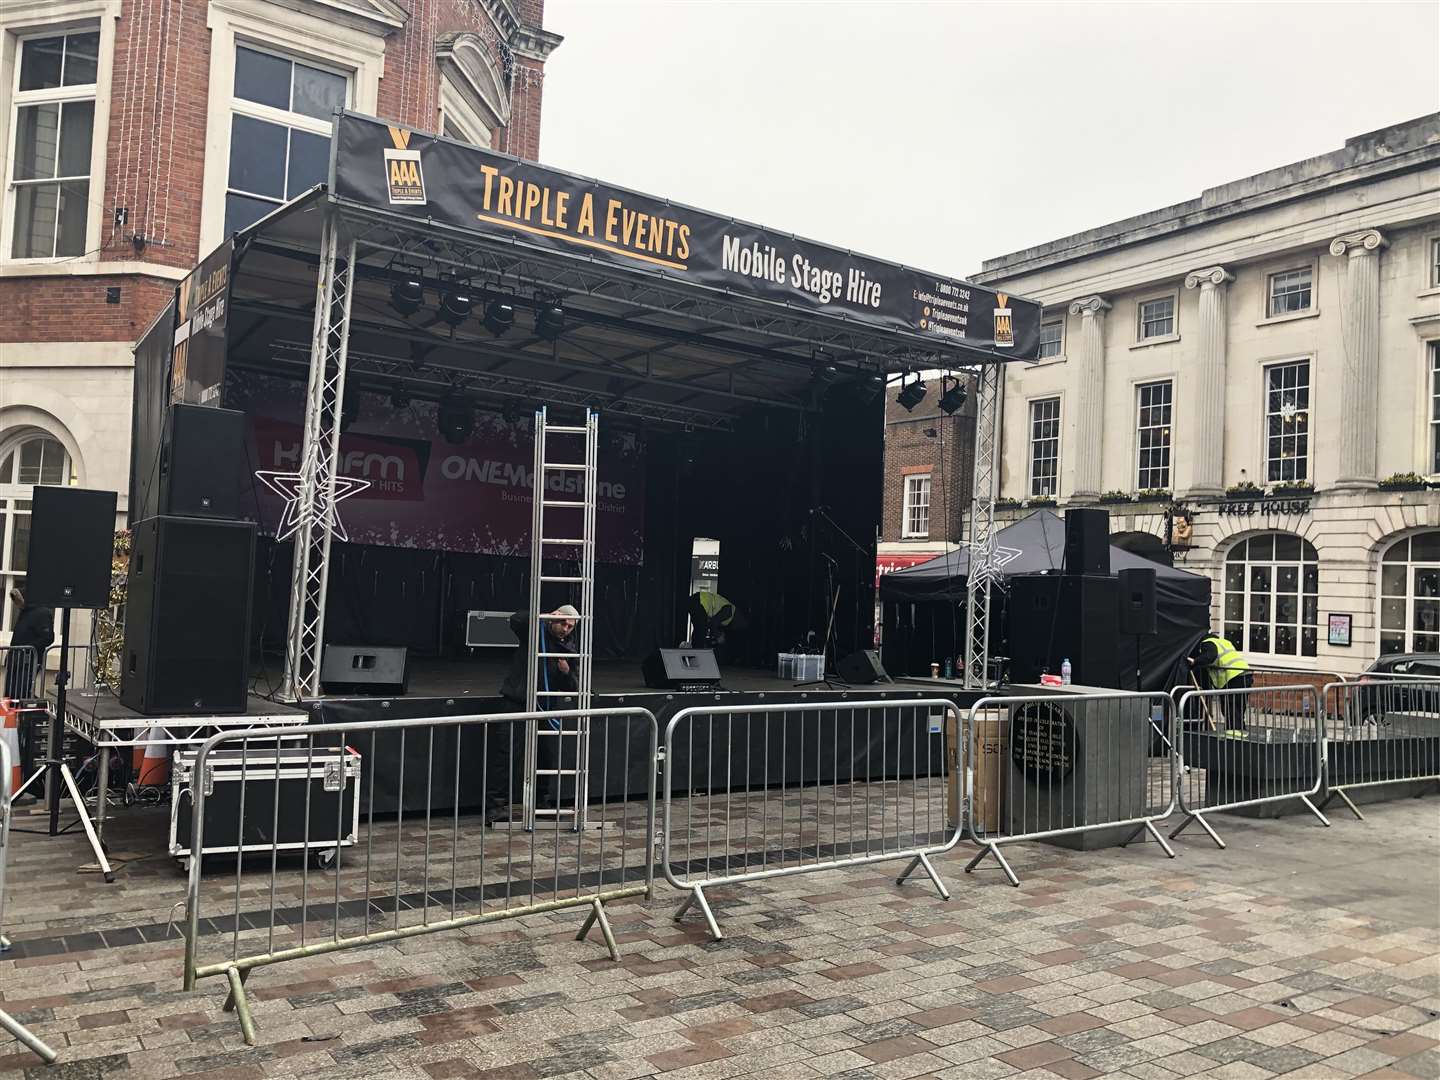 A stage has been set up in Jubilee Square, Maidstone (22212906)